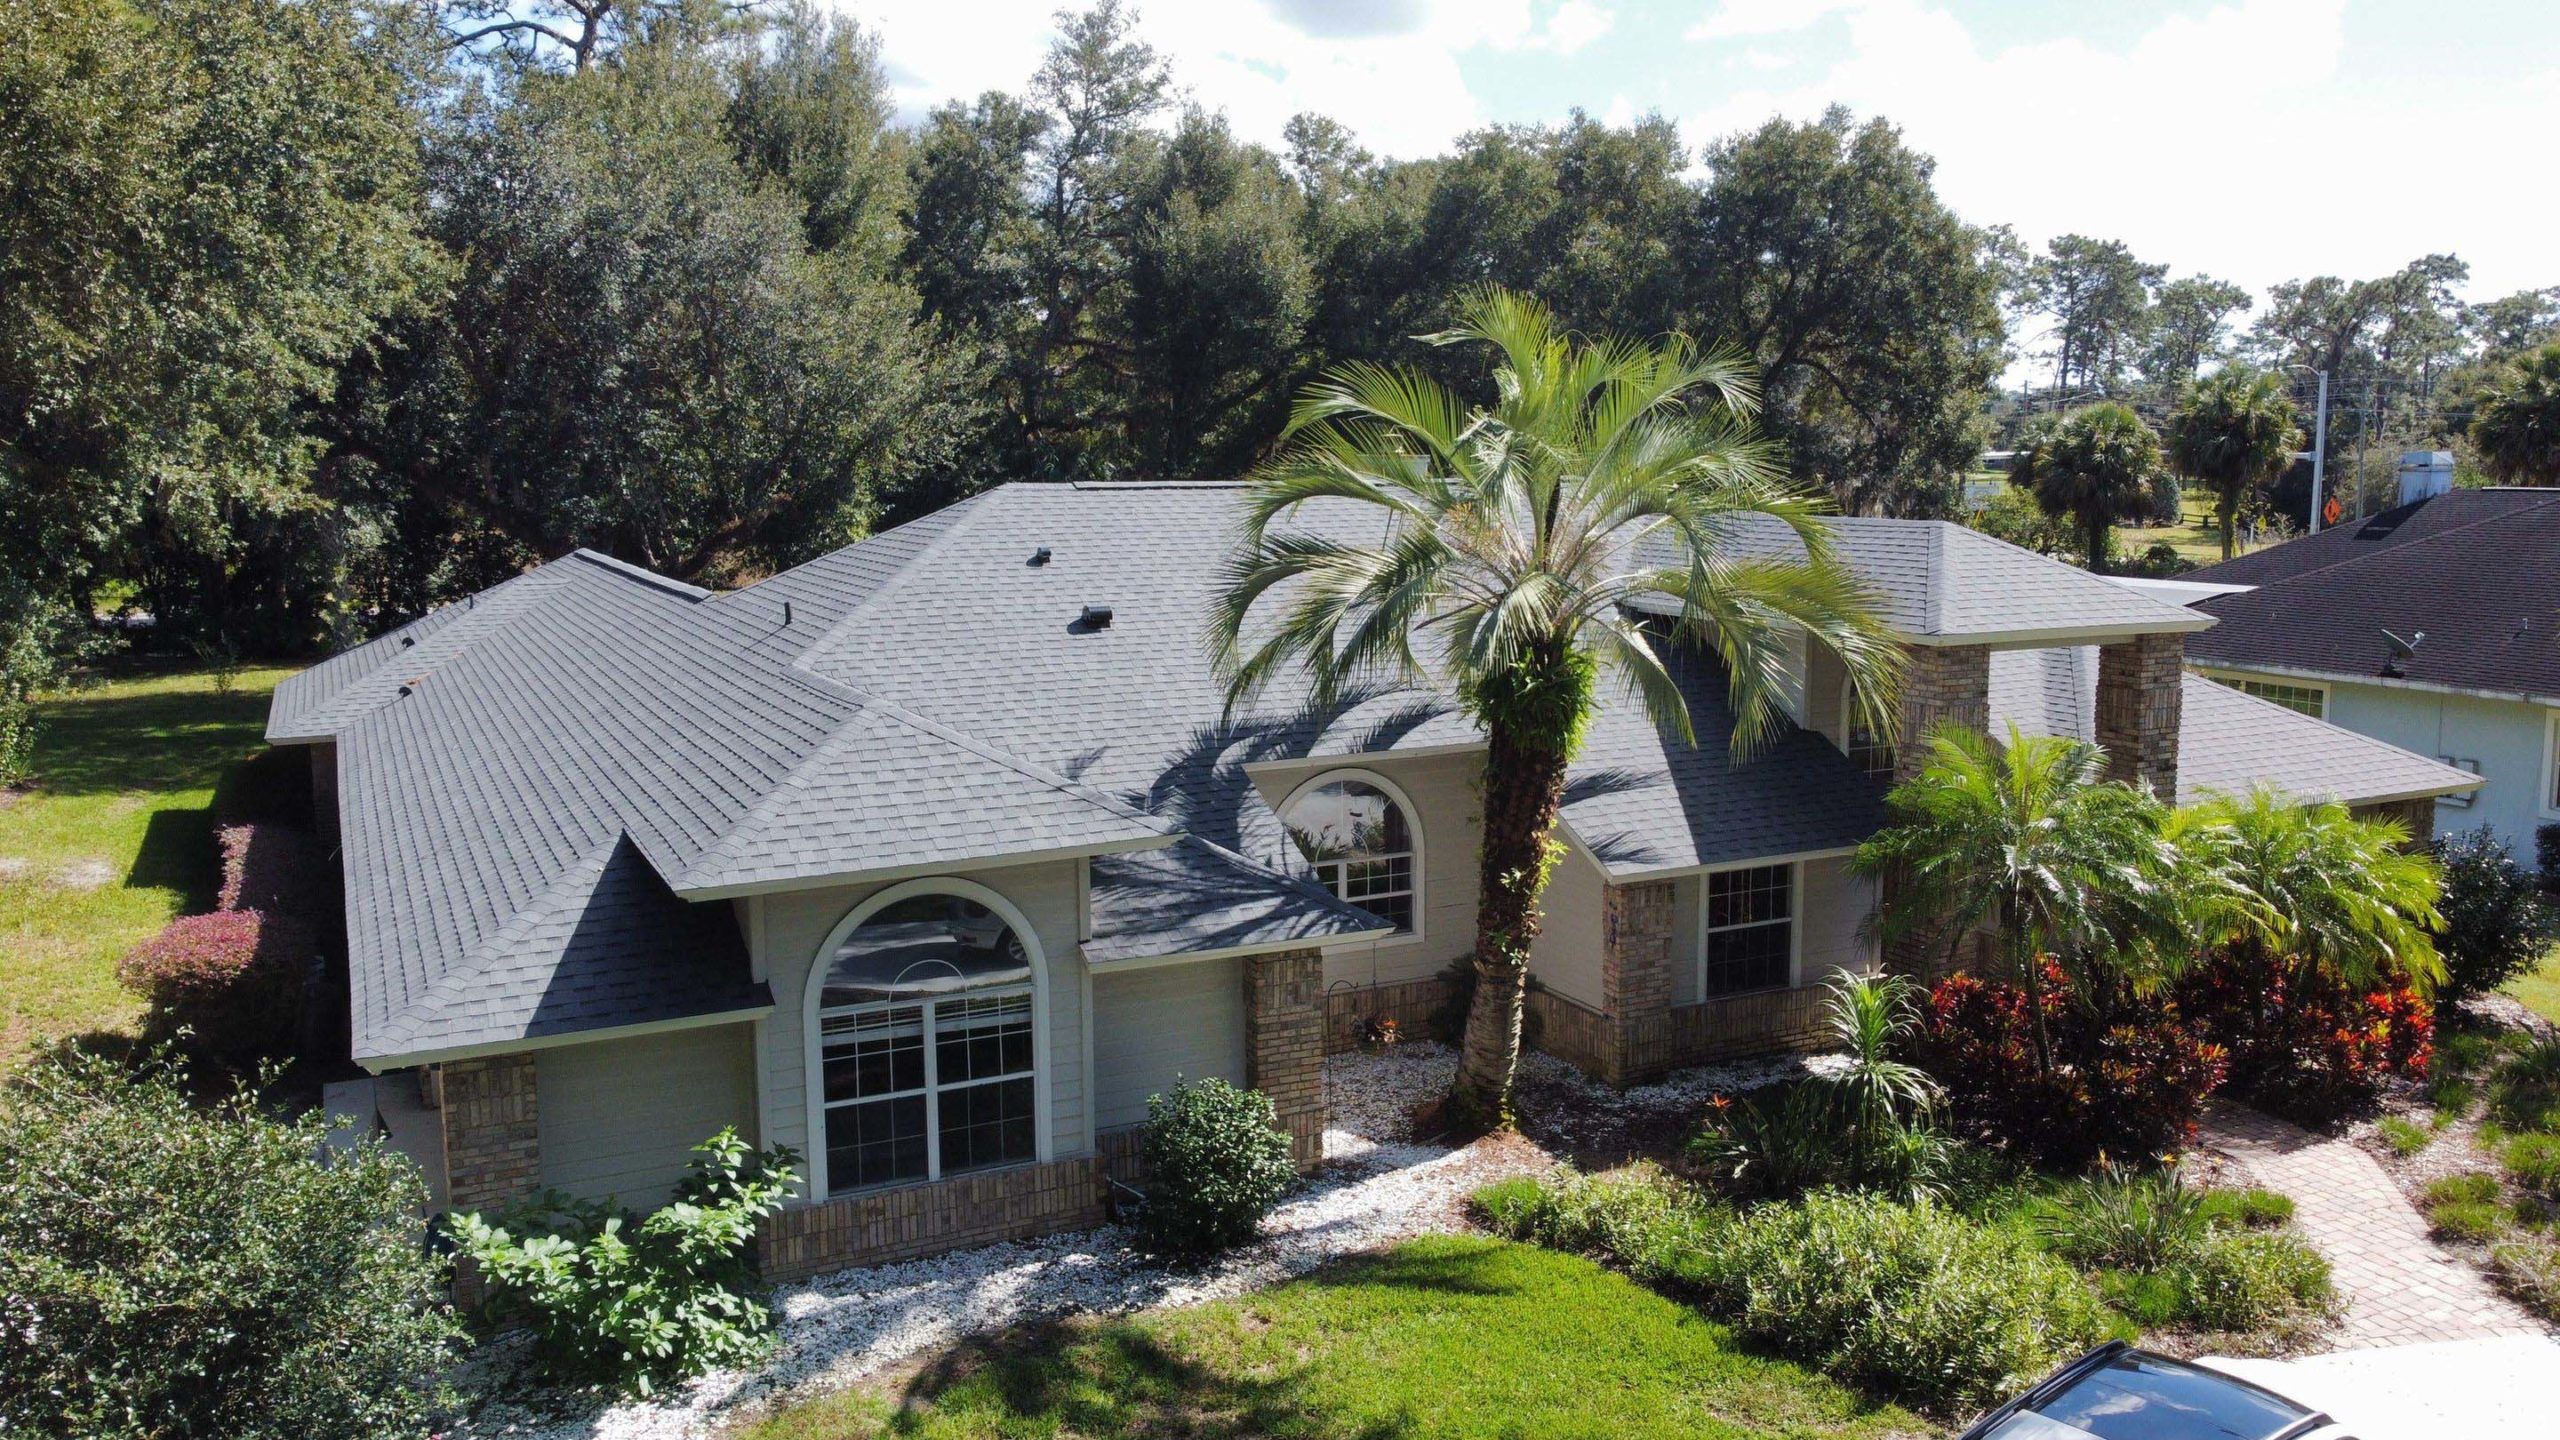 Large home with a newly shingled roof in Greater Orlando, FL